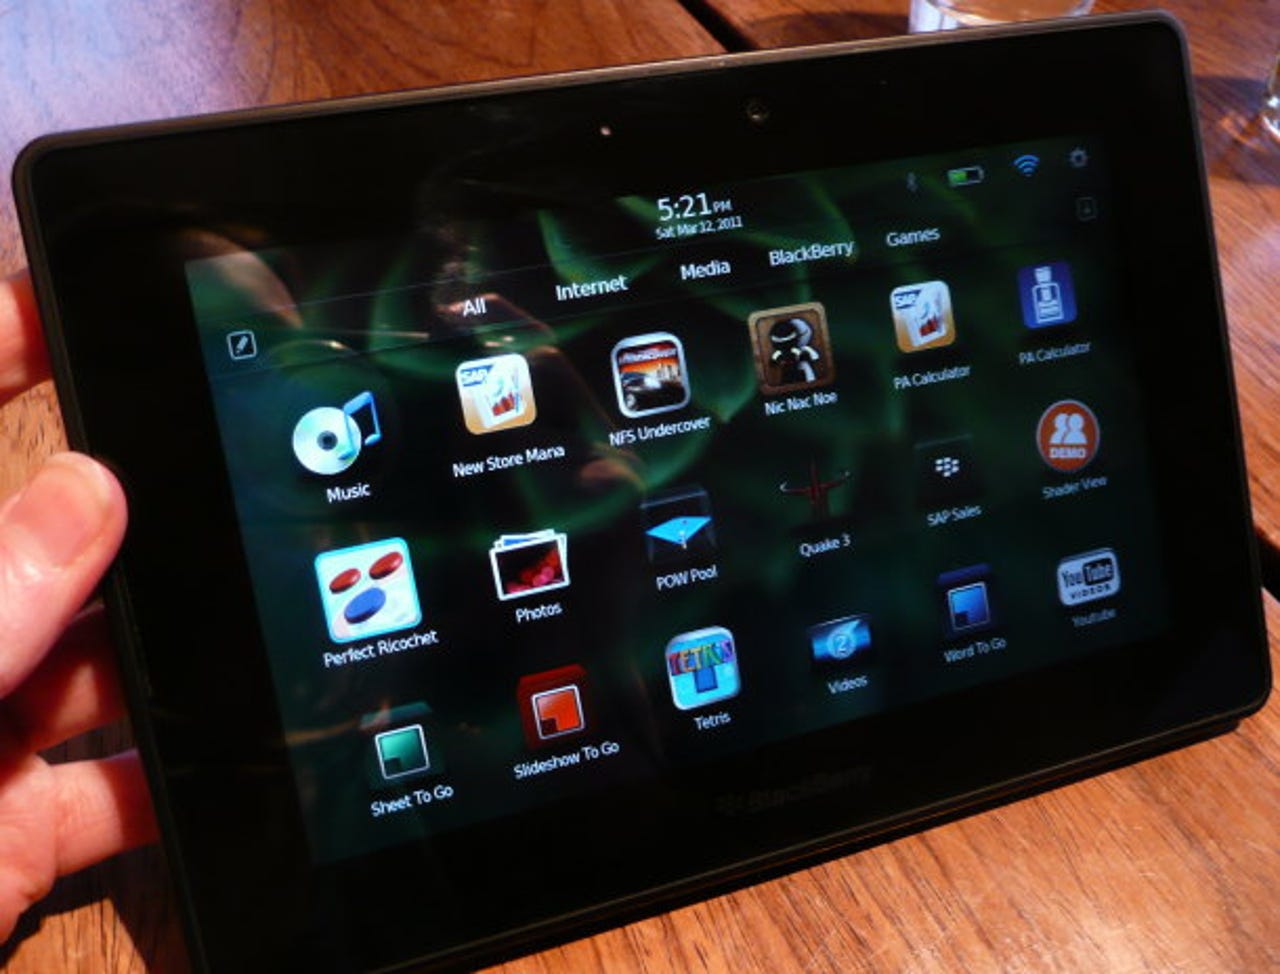 Icons on the BlackBerry PlayBook tablet